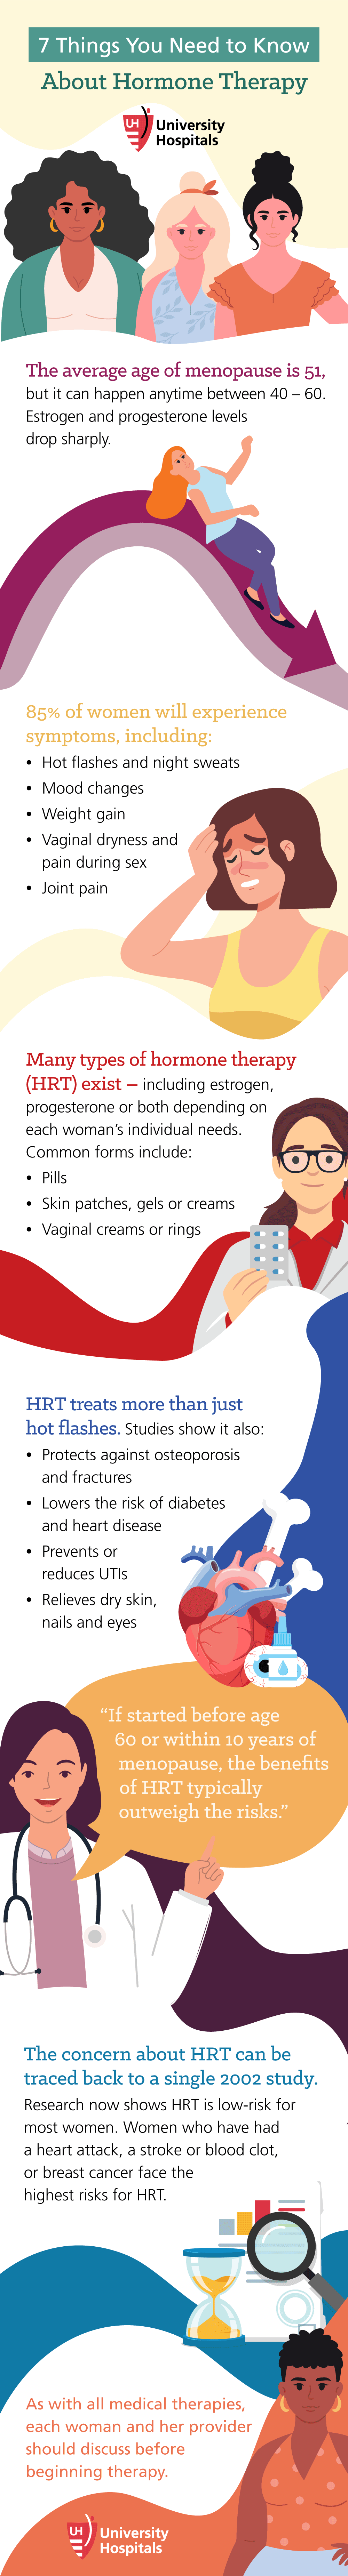 Infographic: 7 Things You Need to Know About Hormone Therapy